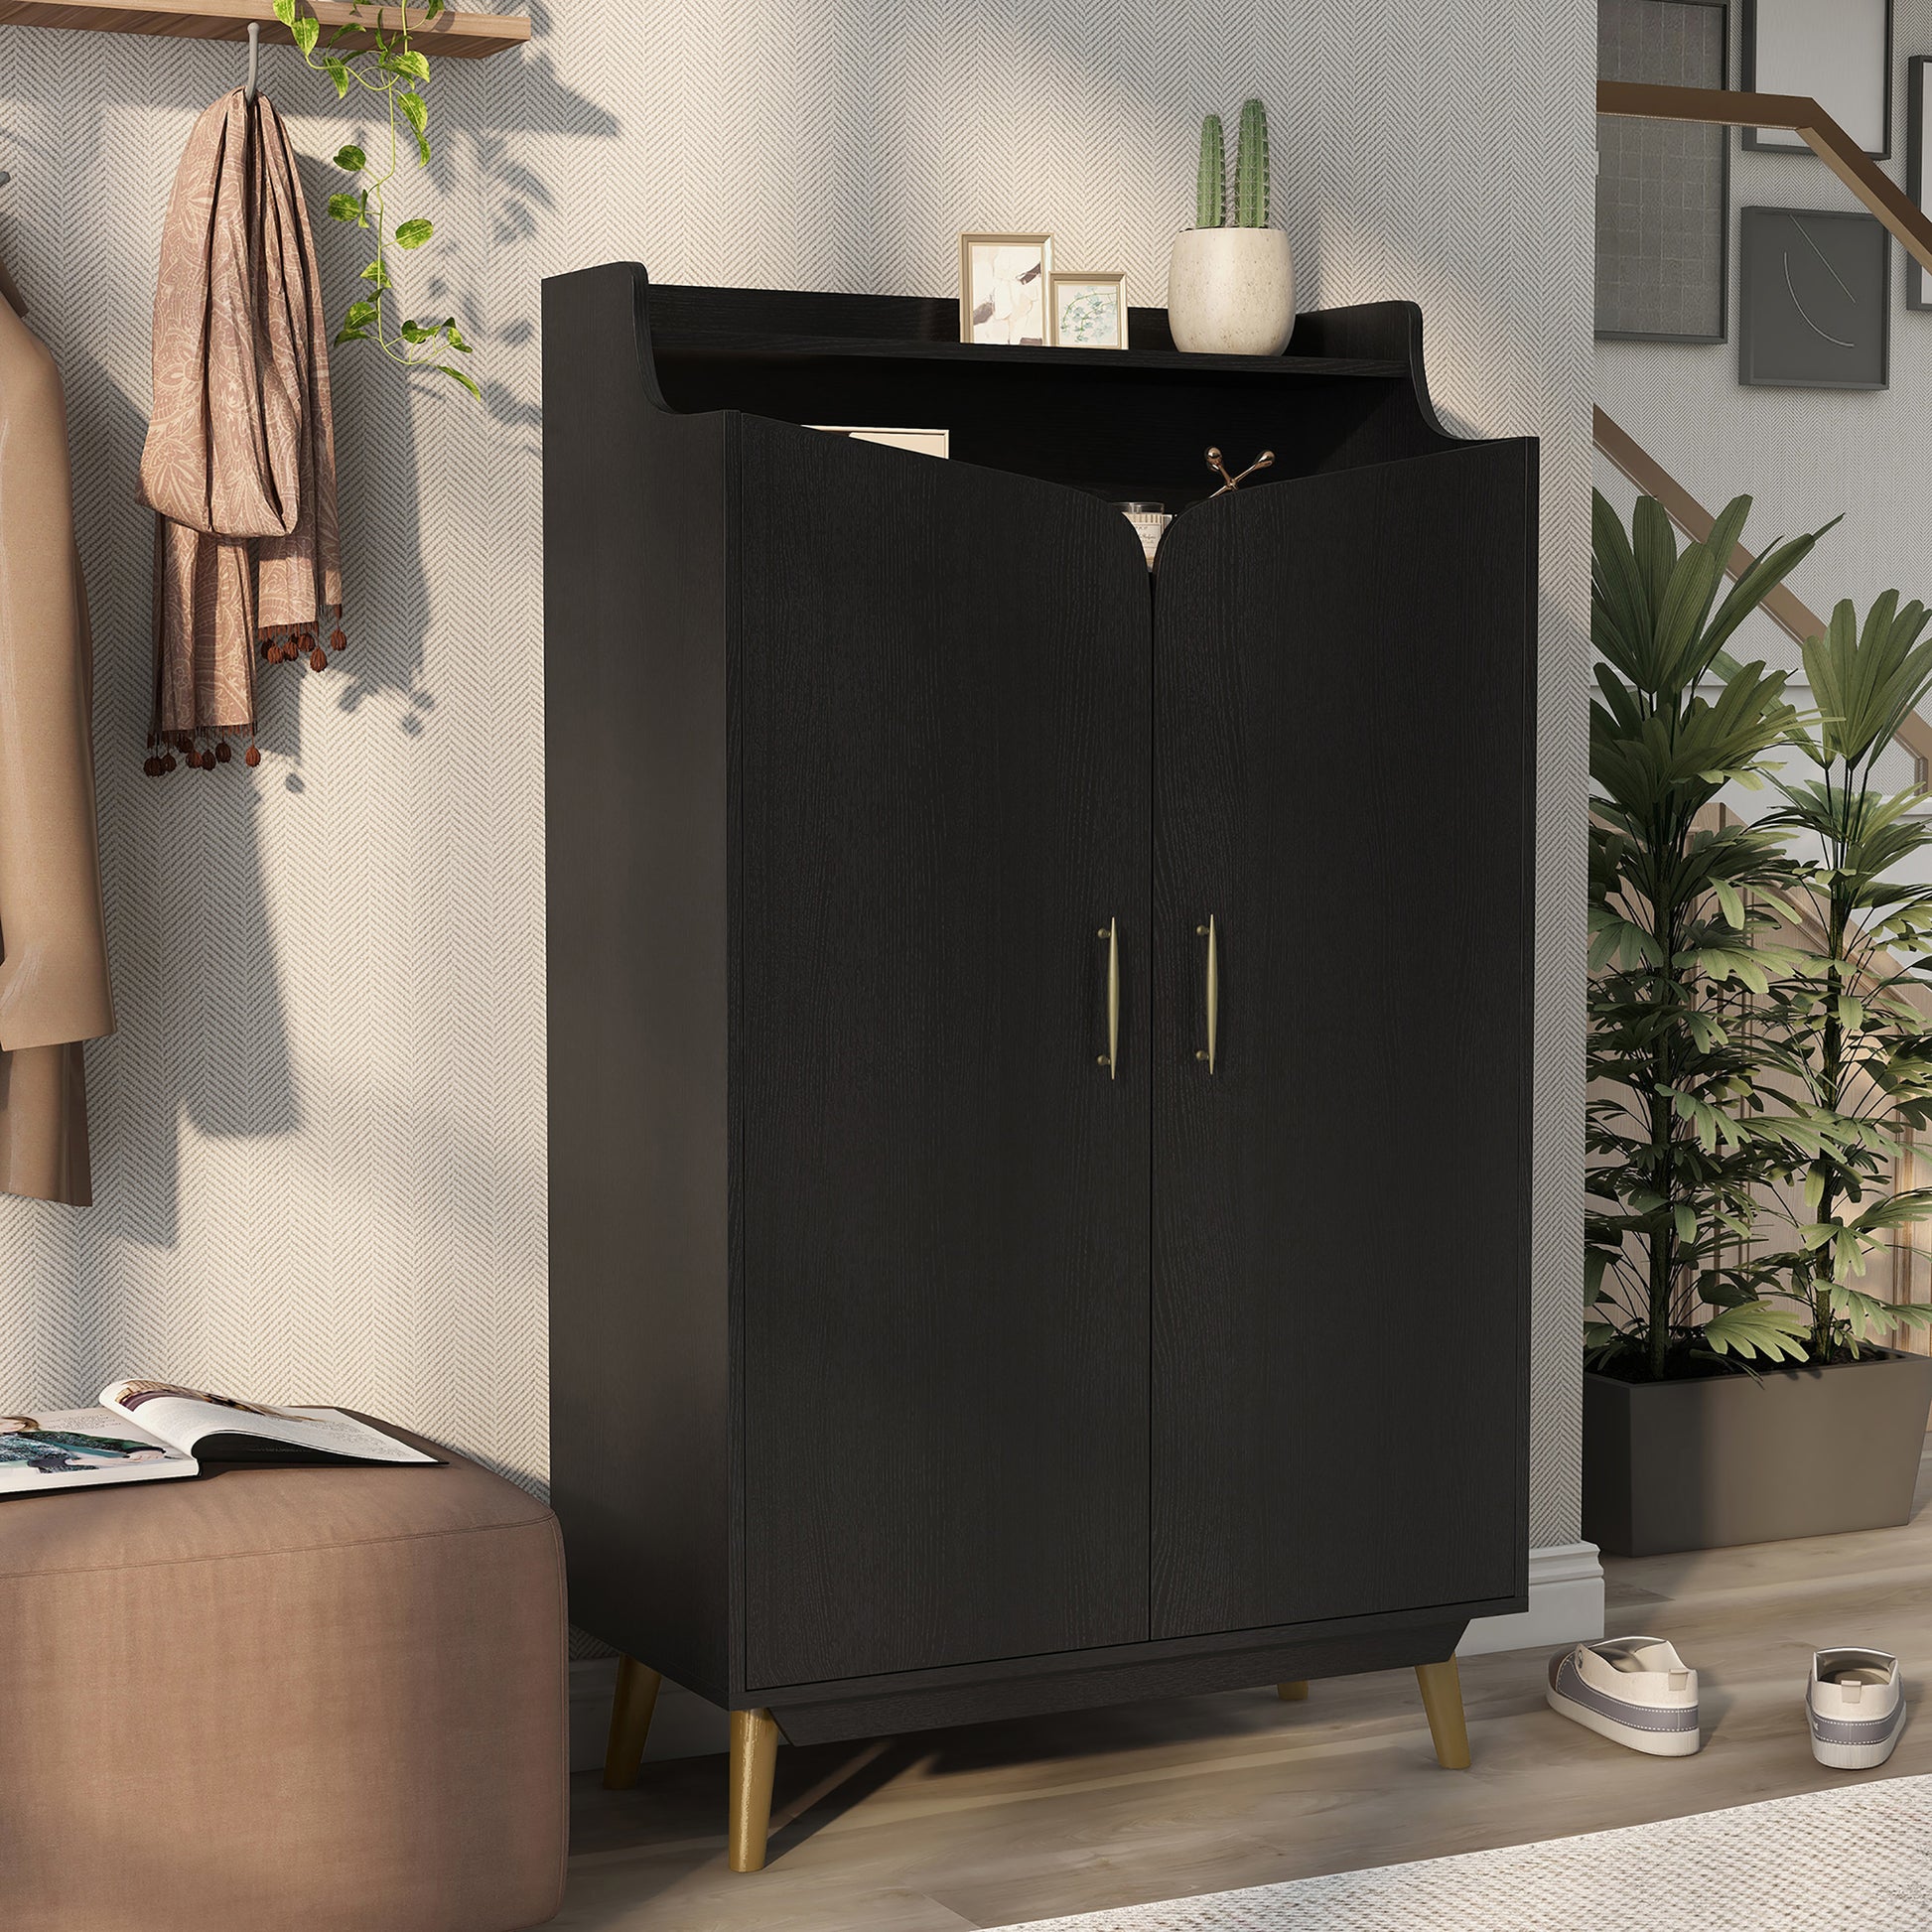 Right angled transitional black and gold two-door 14-pair shoe cabinet in an entryway with accessories